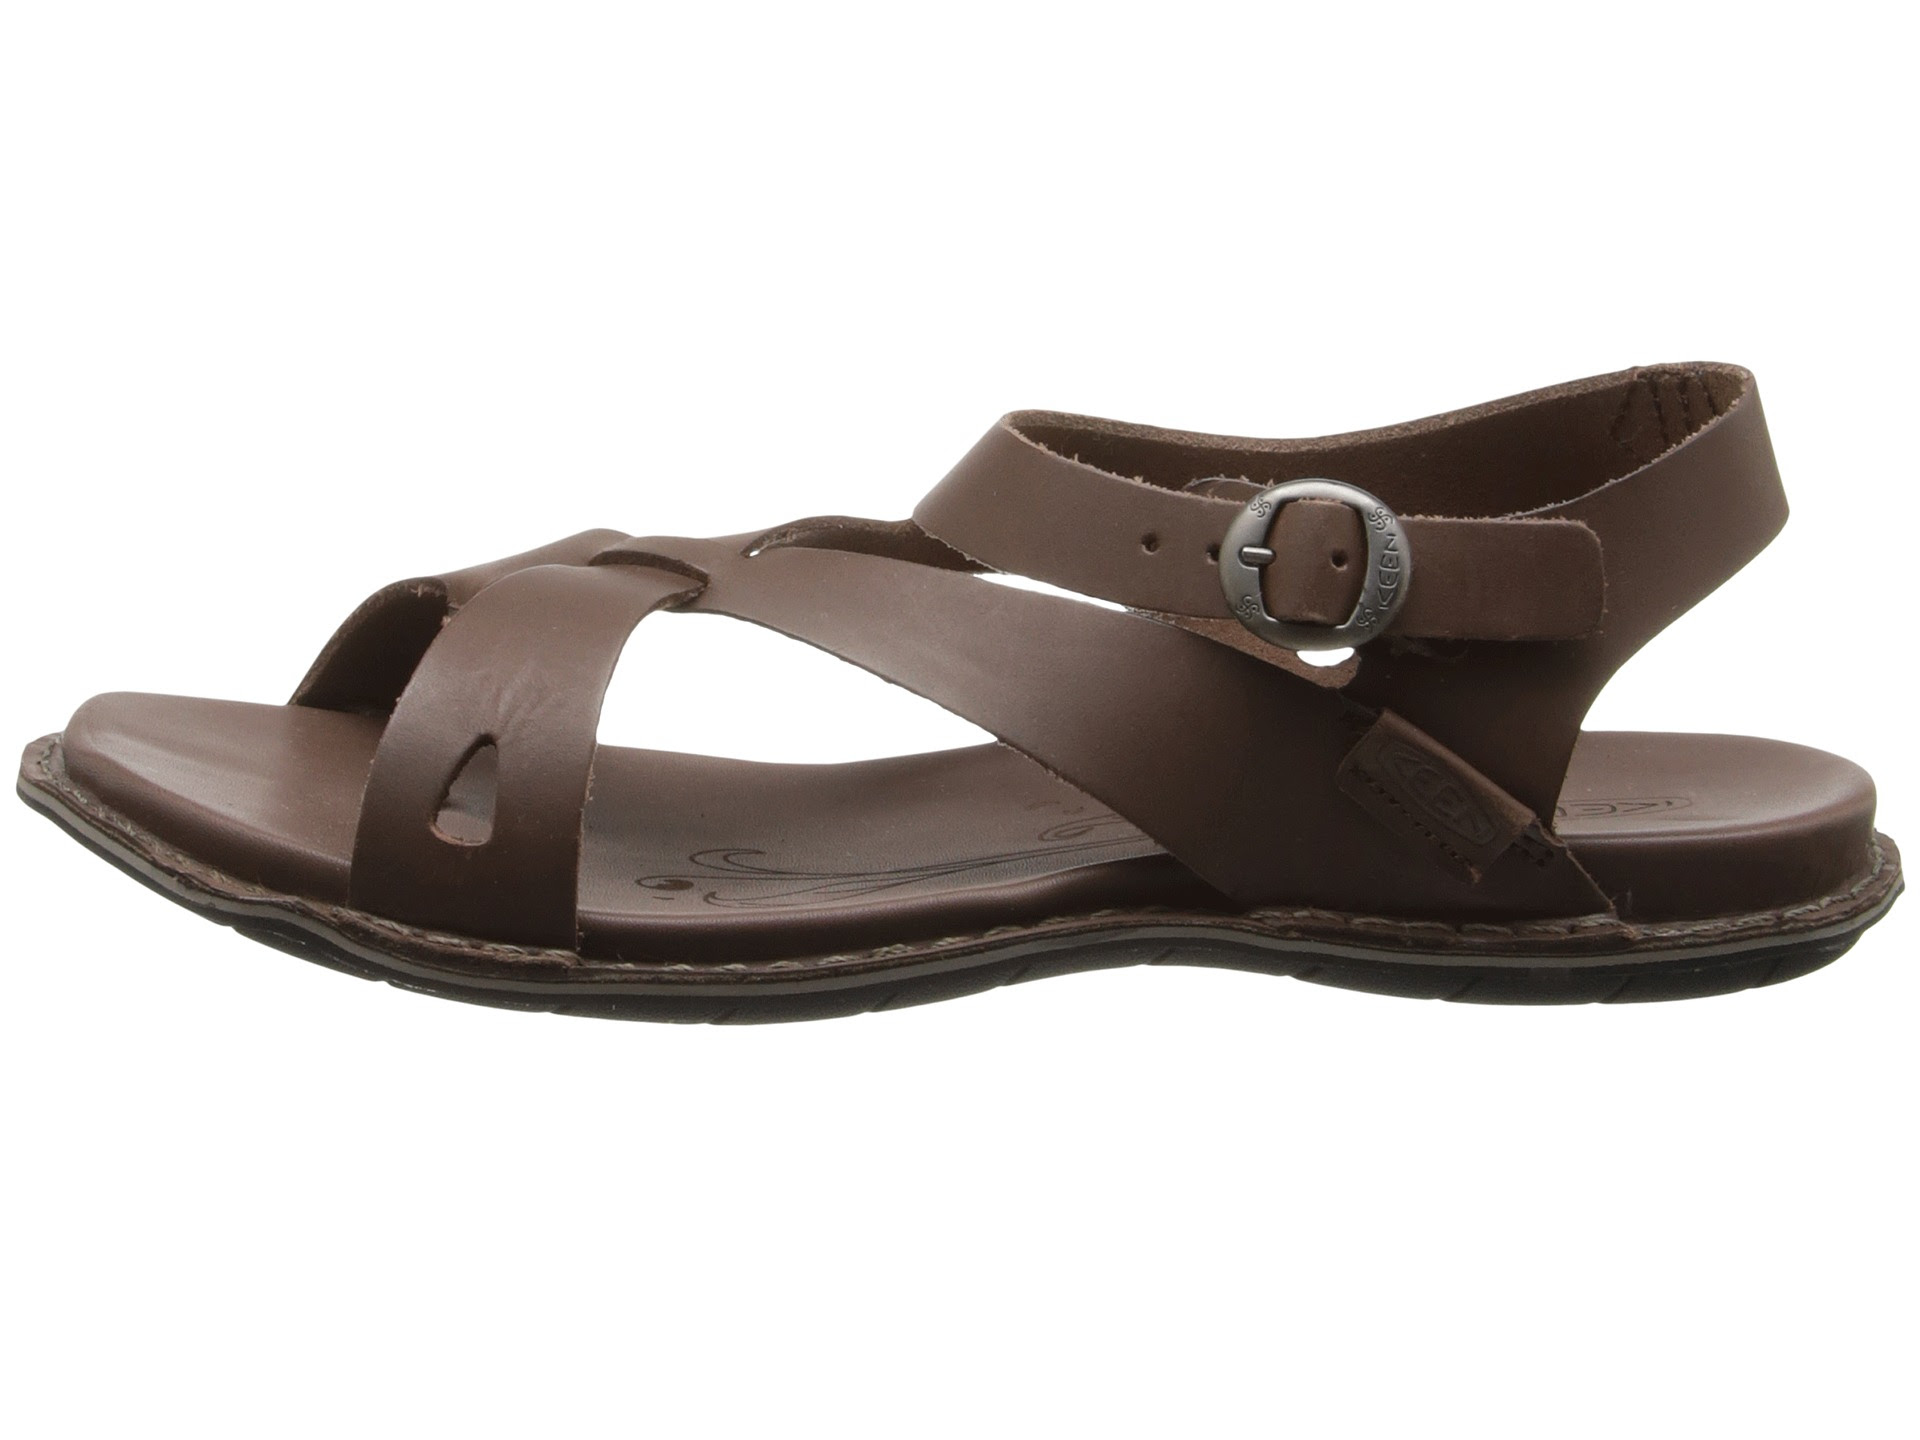 Zappos Keen Shoes For Women ~ Low Wedge Sandals